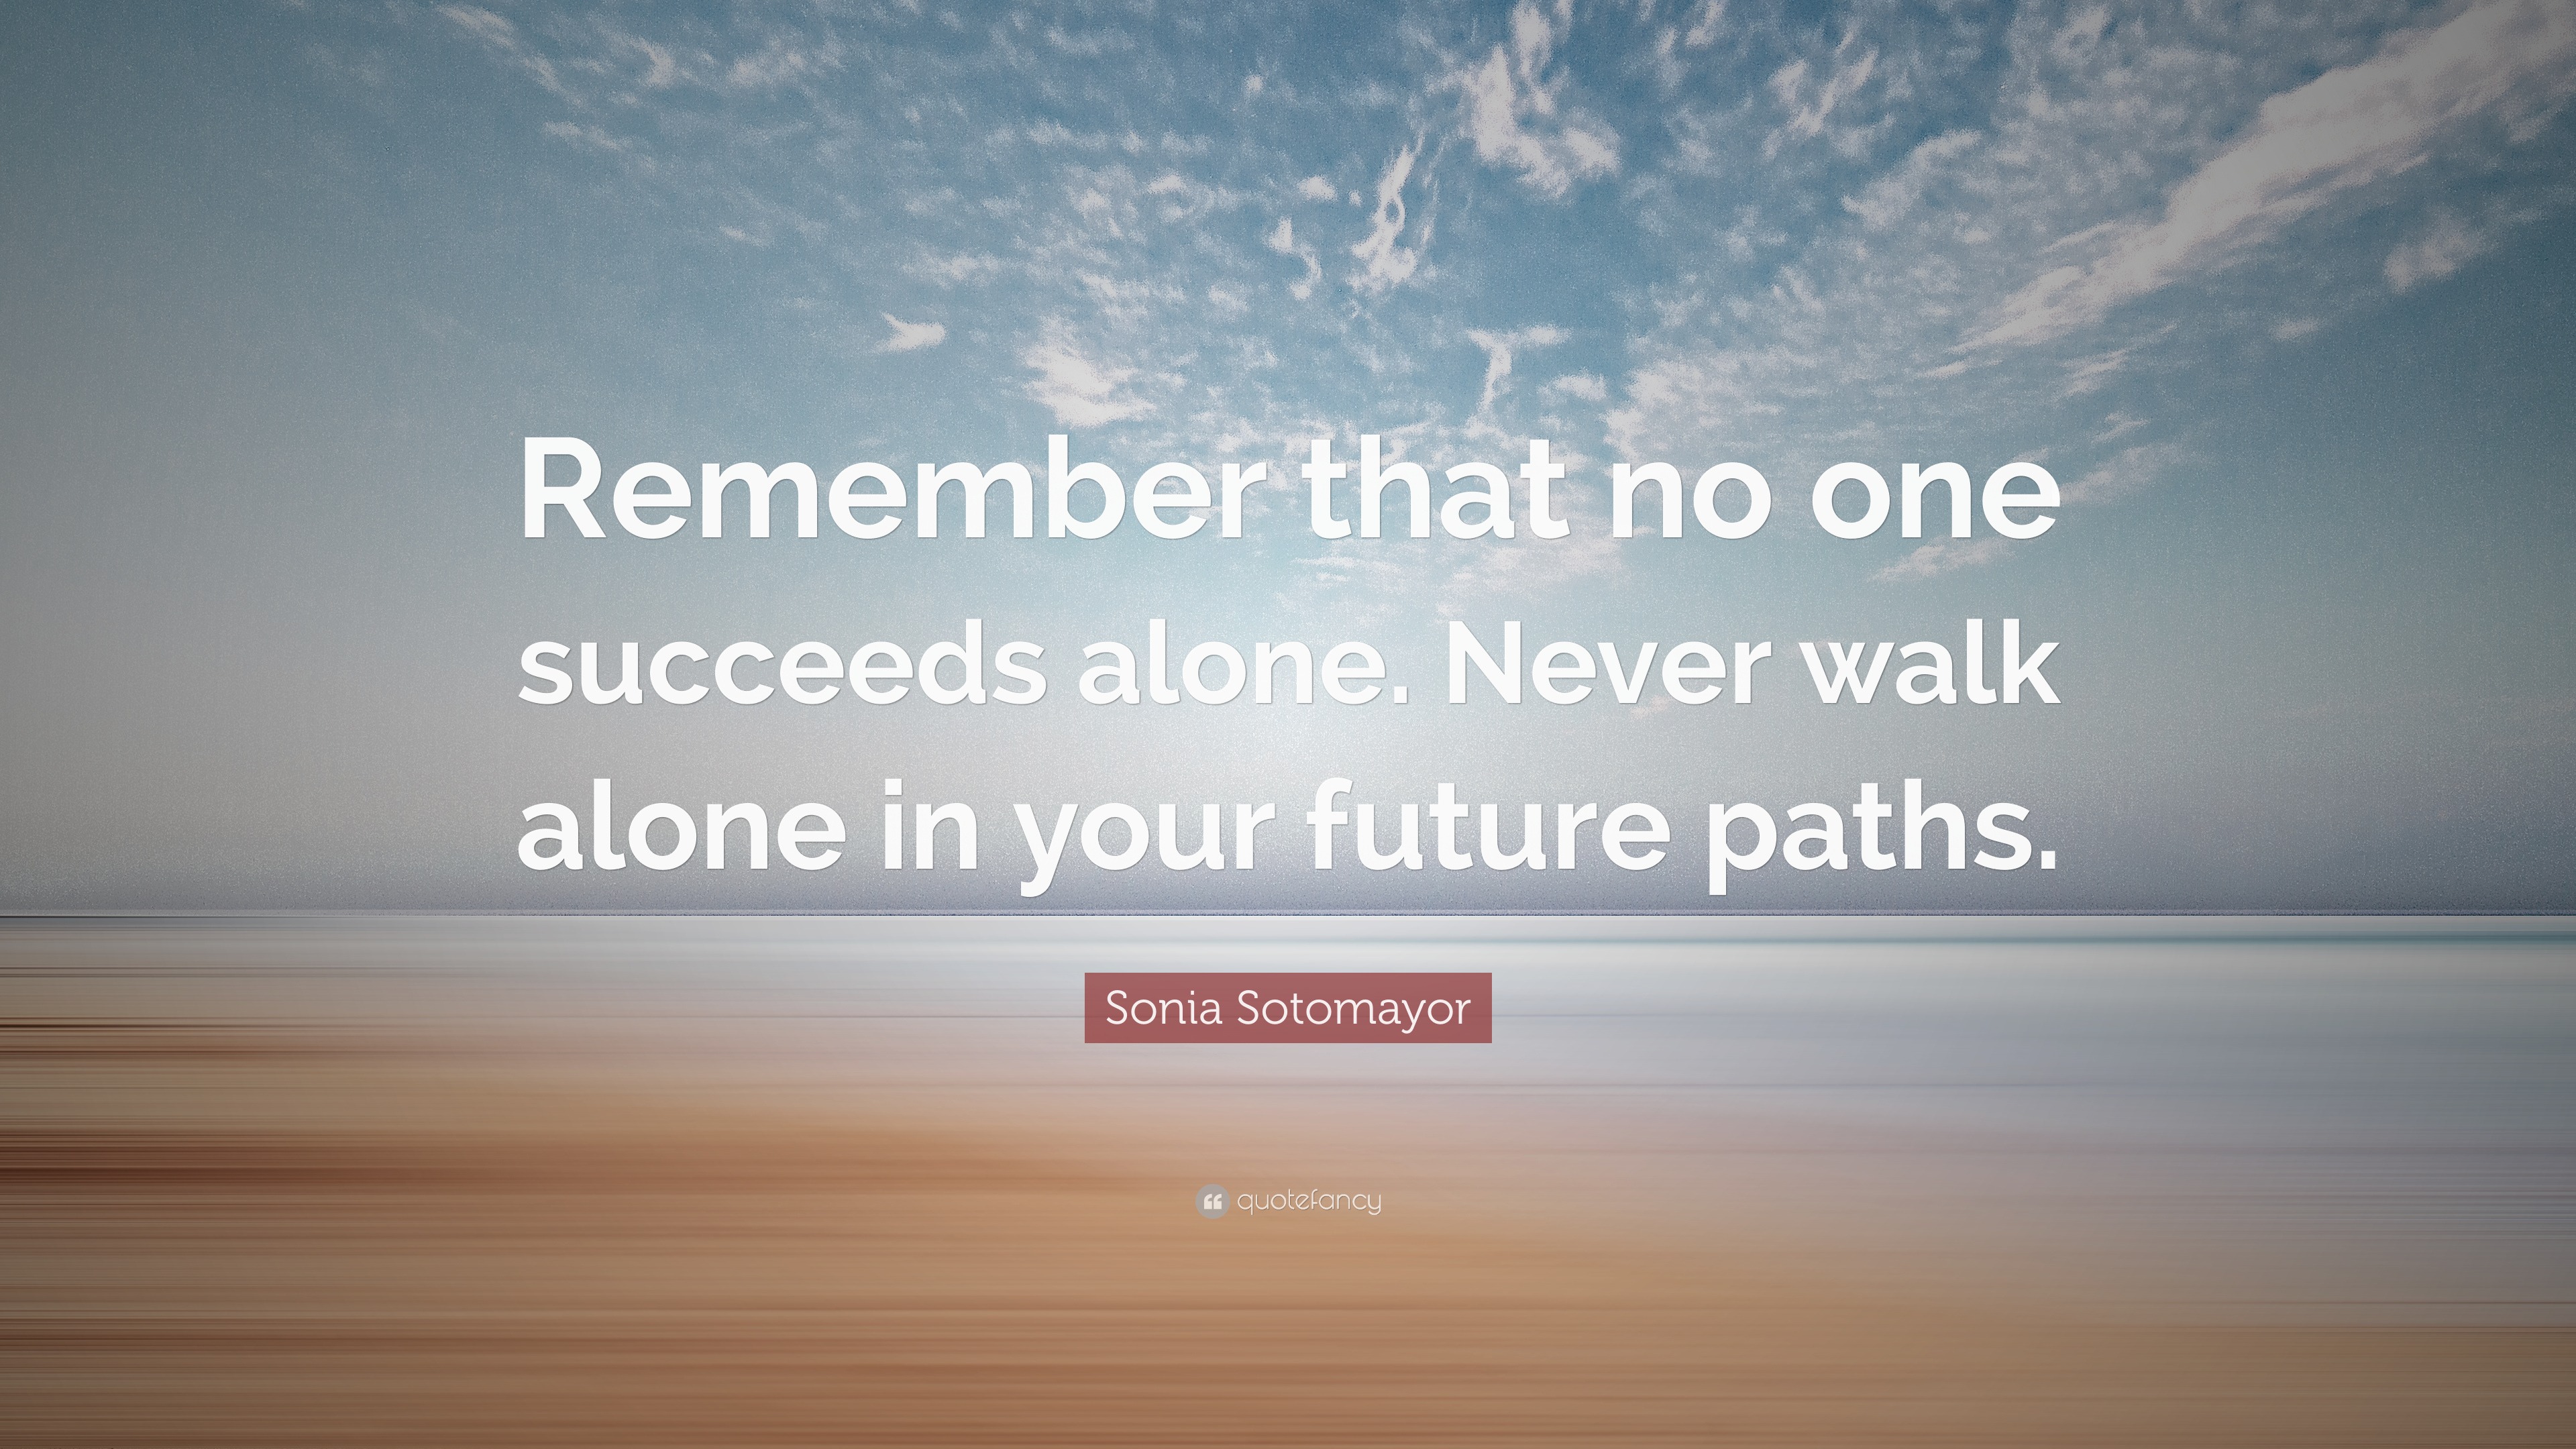 2283326 Sonia Sotomayor Quote Remember that no one succeeds alone Never